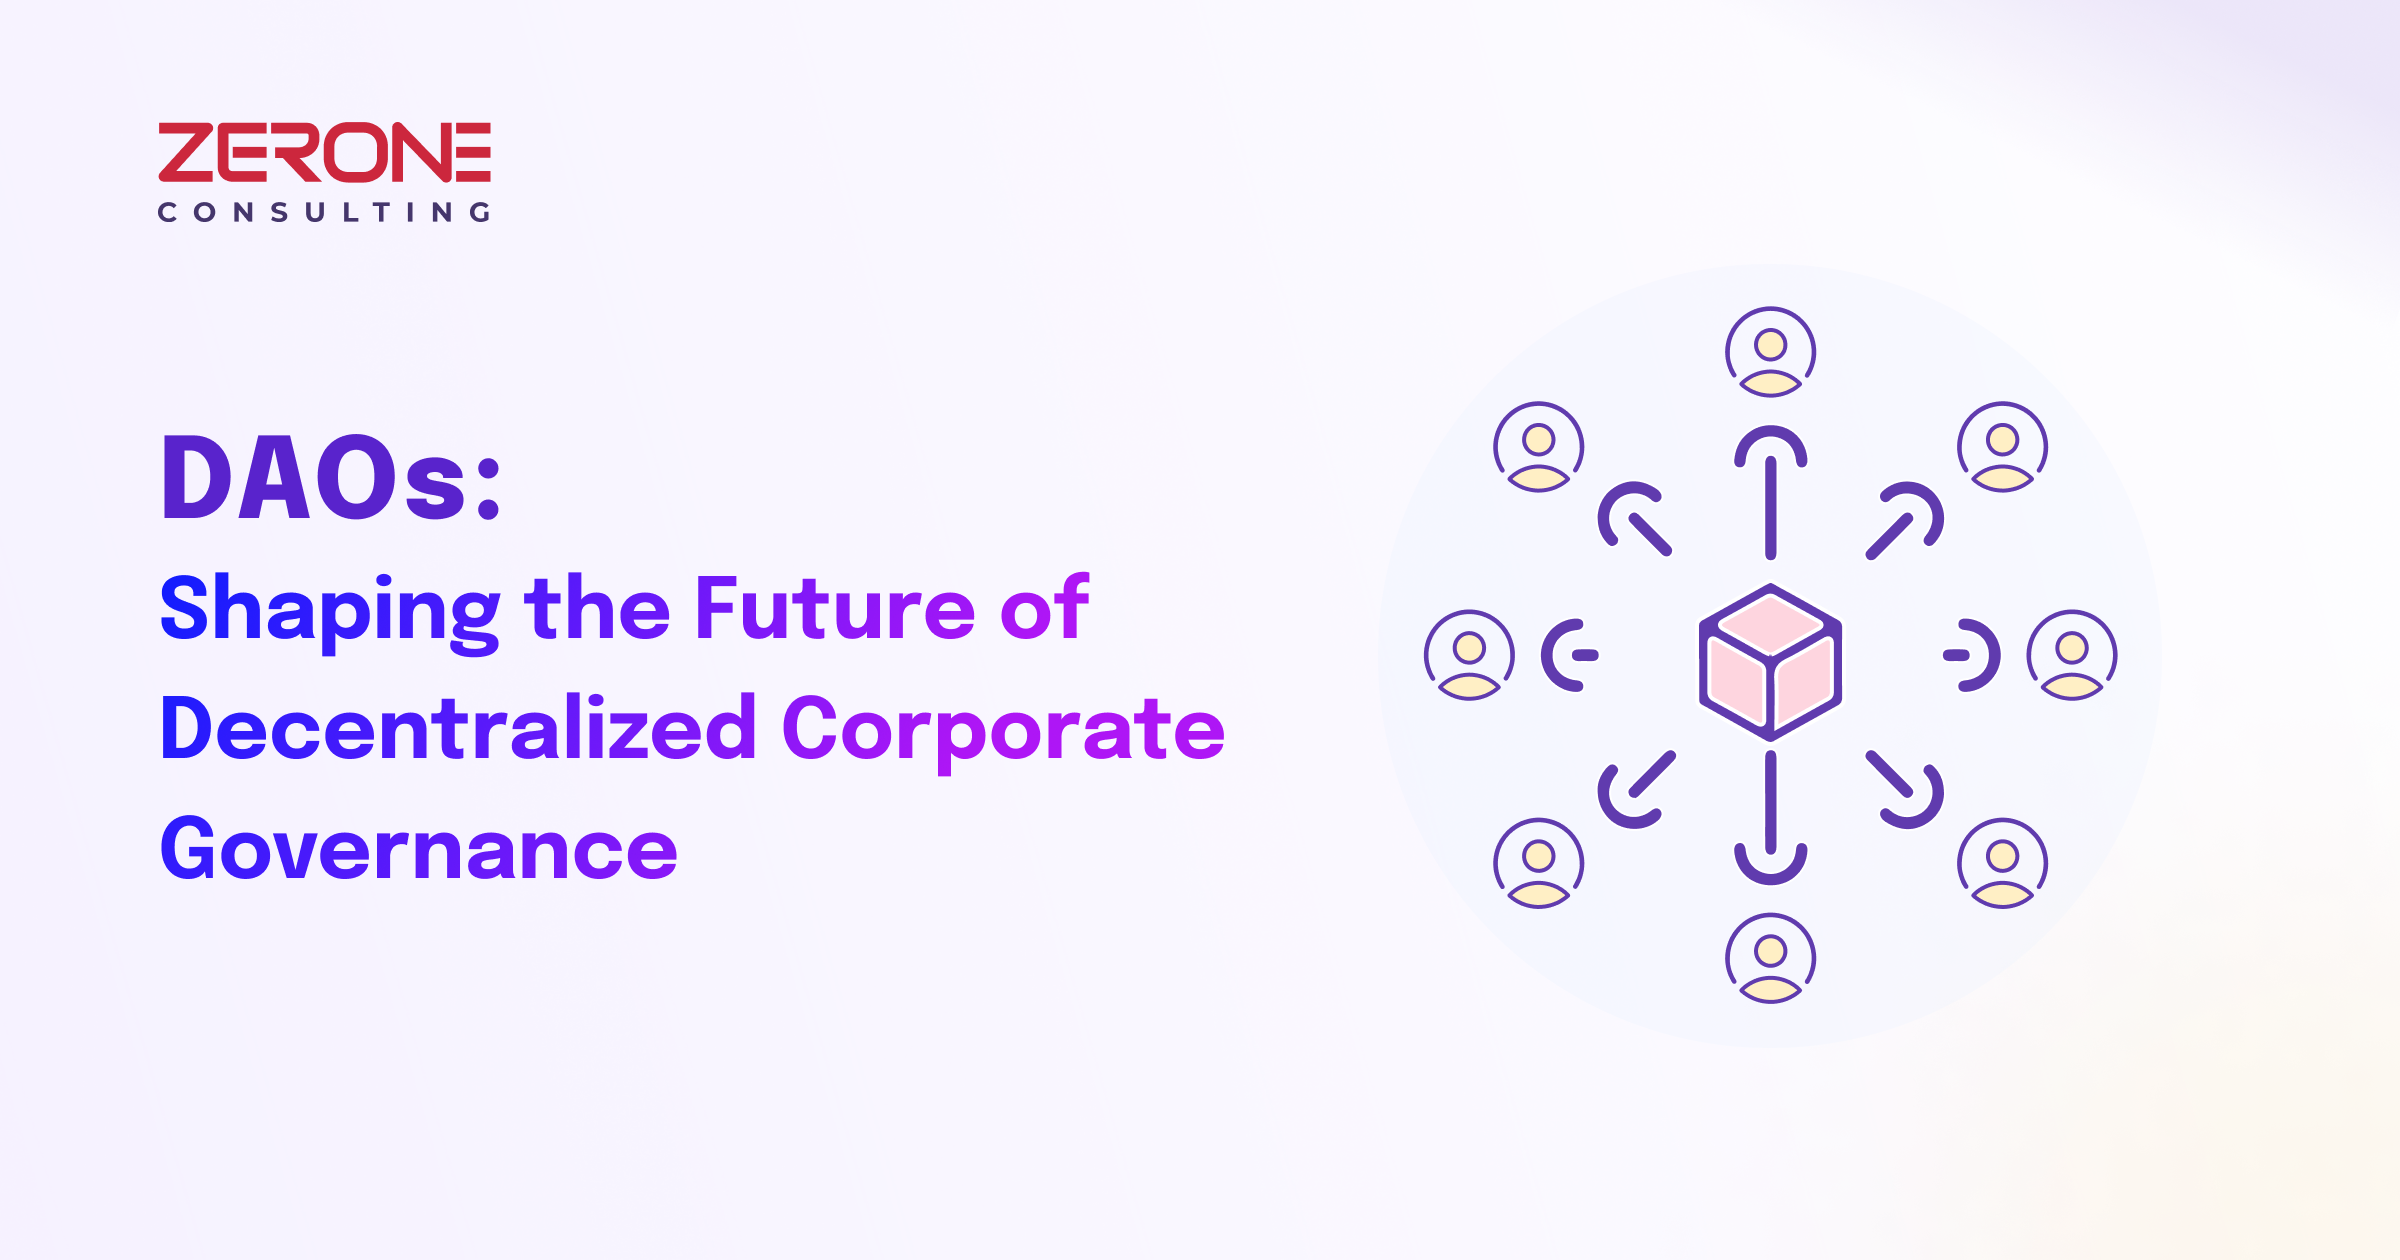 Decentralized Autonomous Organizations (DAOs): Redefining Corporate Governance and Operations for a Decentralized Future